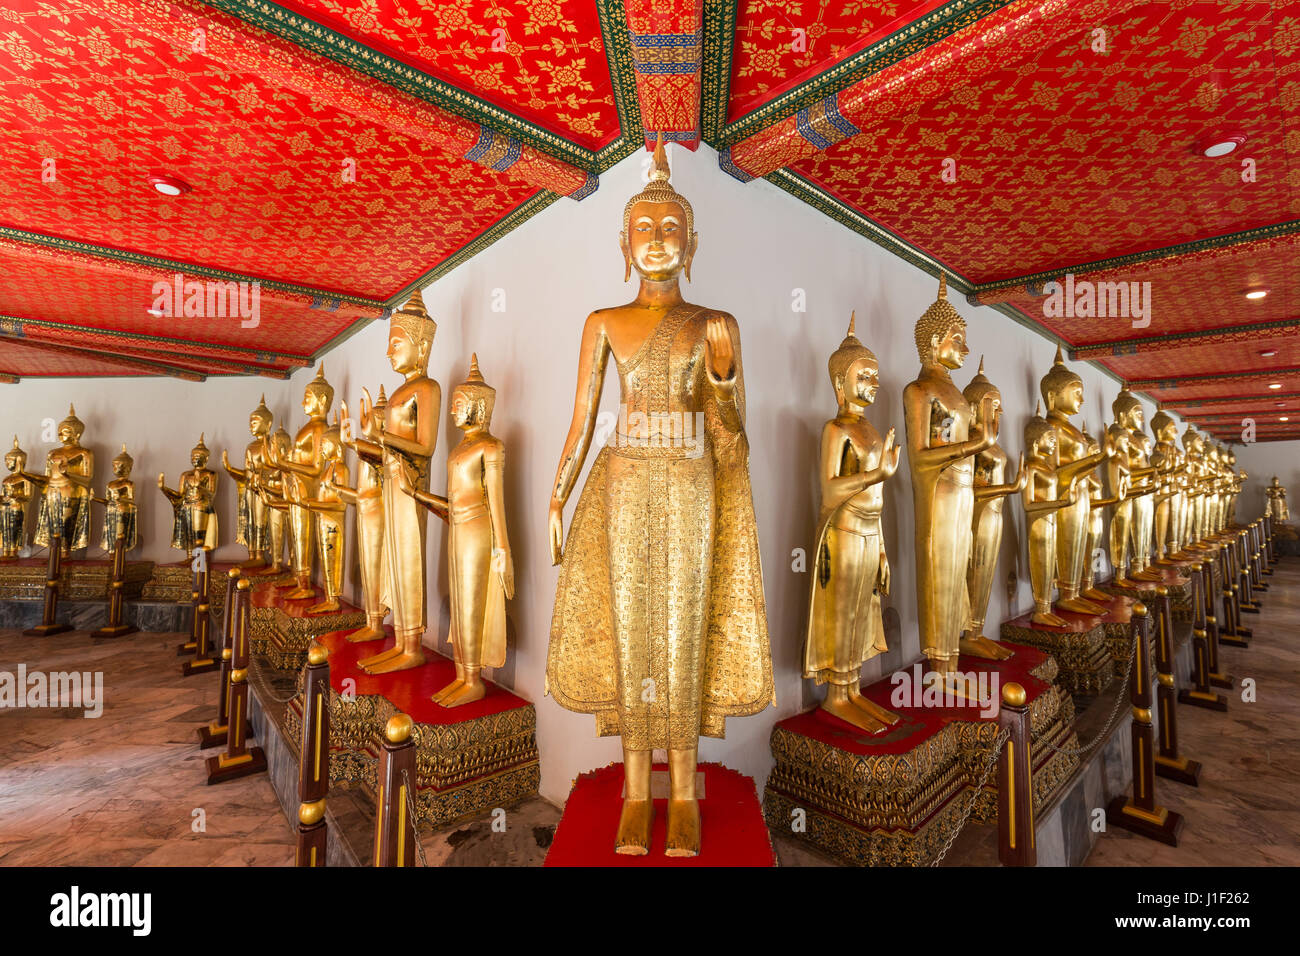 A lot of golden Buddha statues under a decorated and red roof at the Wat Pho (Po) temple complex in Bangkok, Thailand. Stock Photo